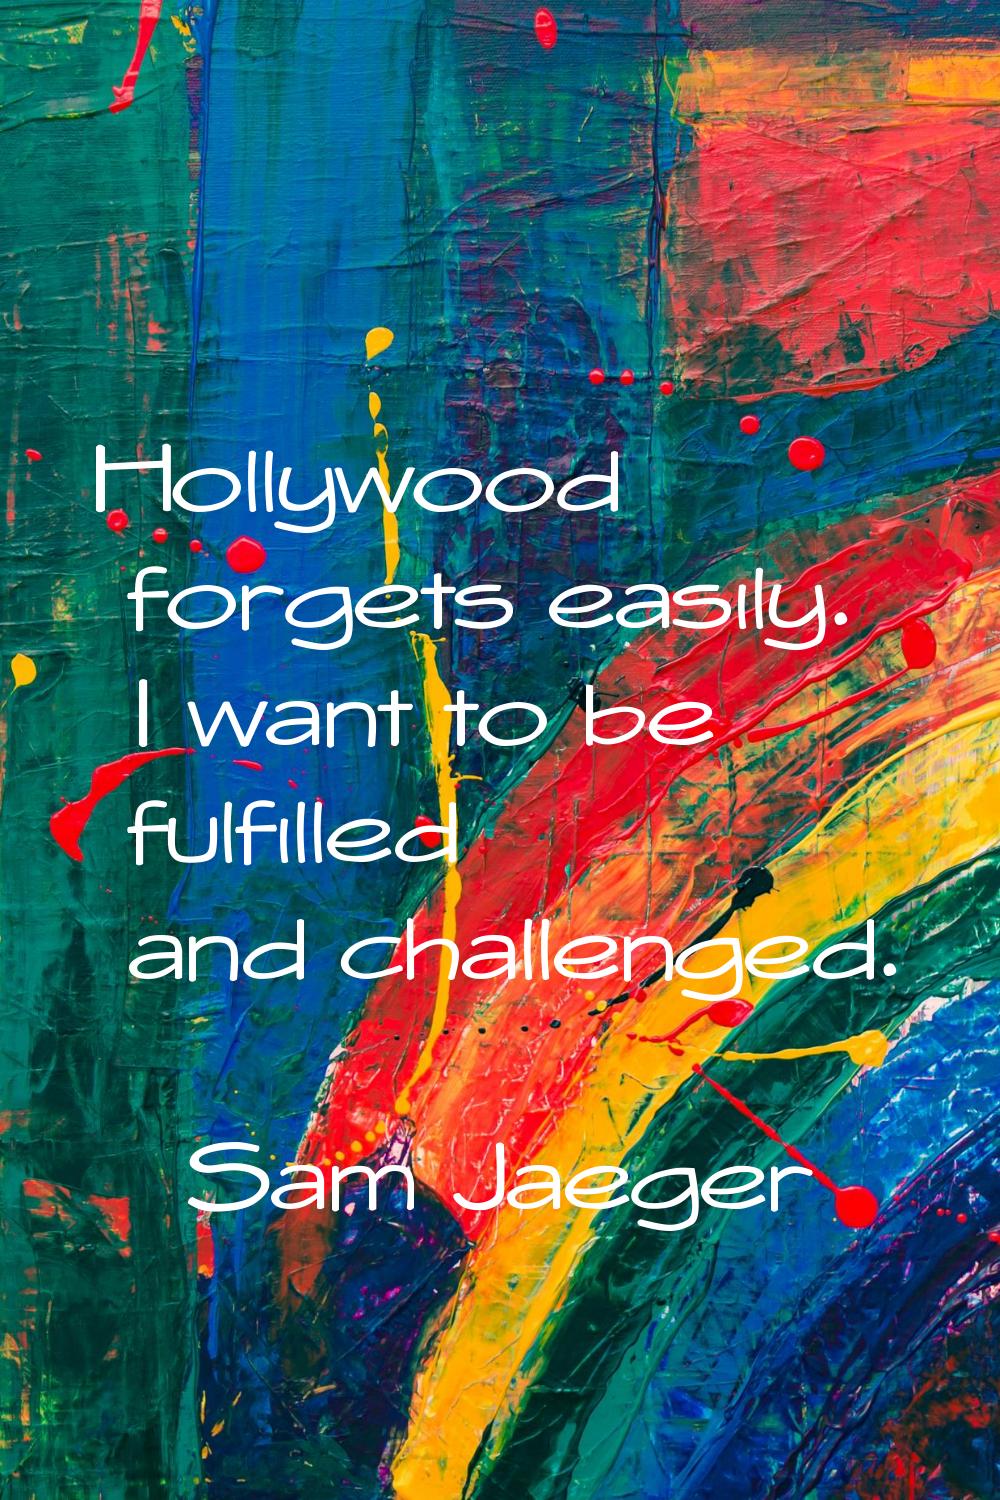 Hollywood forgets easily. I want to be fulfilled and challenged.